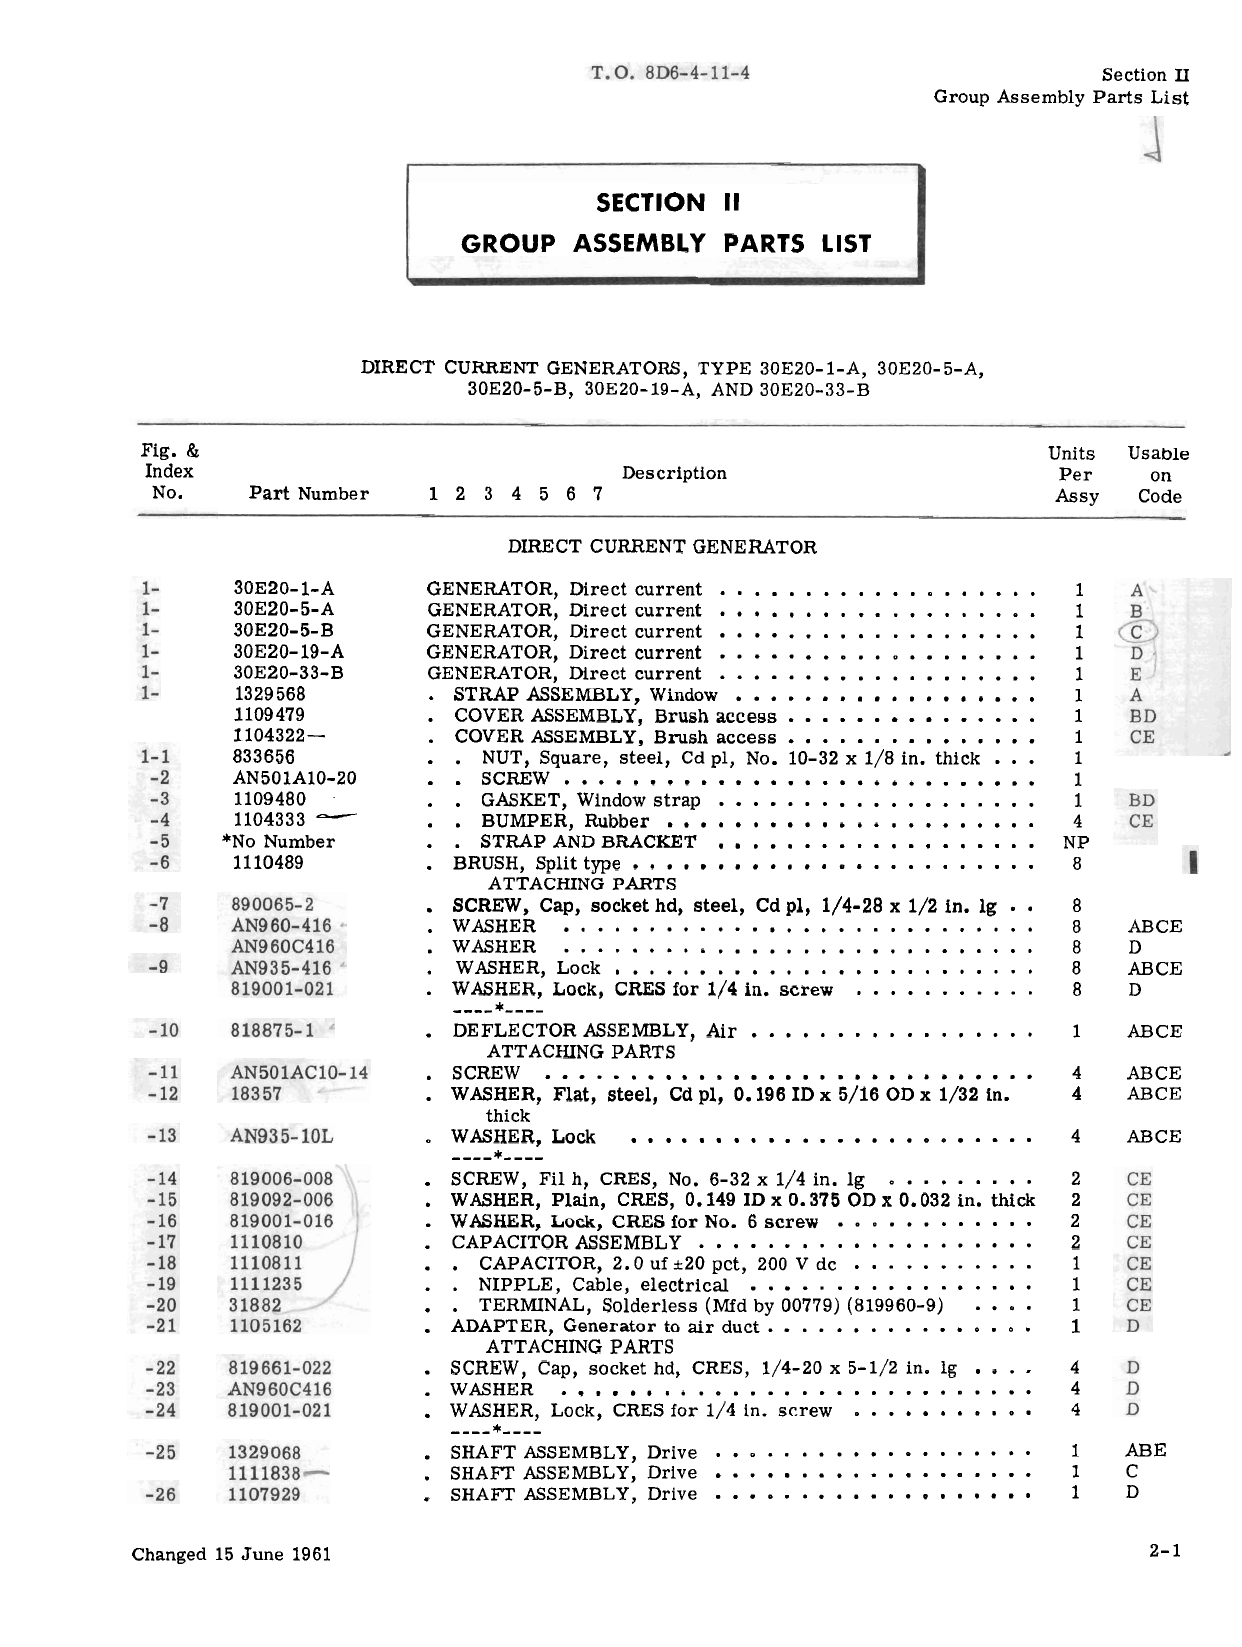 Sample page 7 from AirCorps Library document: Illustrated Parts Breakdown for Direct Current Generator - Types 30E20-1-A, 30E20-5-A, 30E20-5-B, 30E20-19-A, and 30E20-33-B 